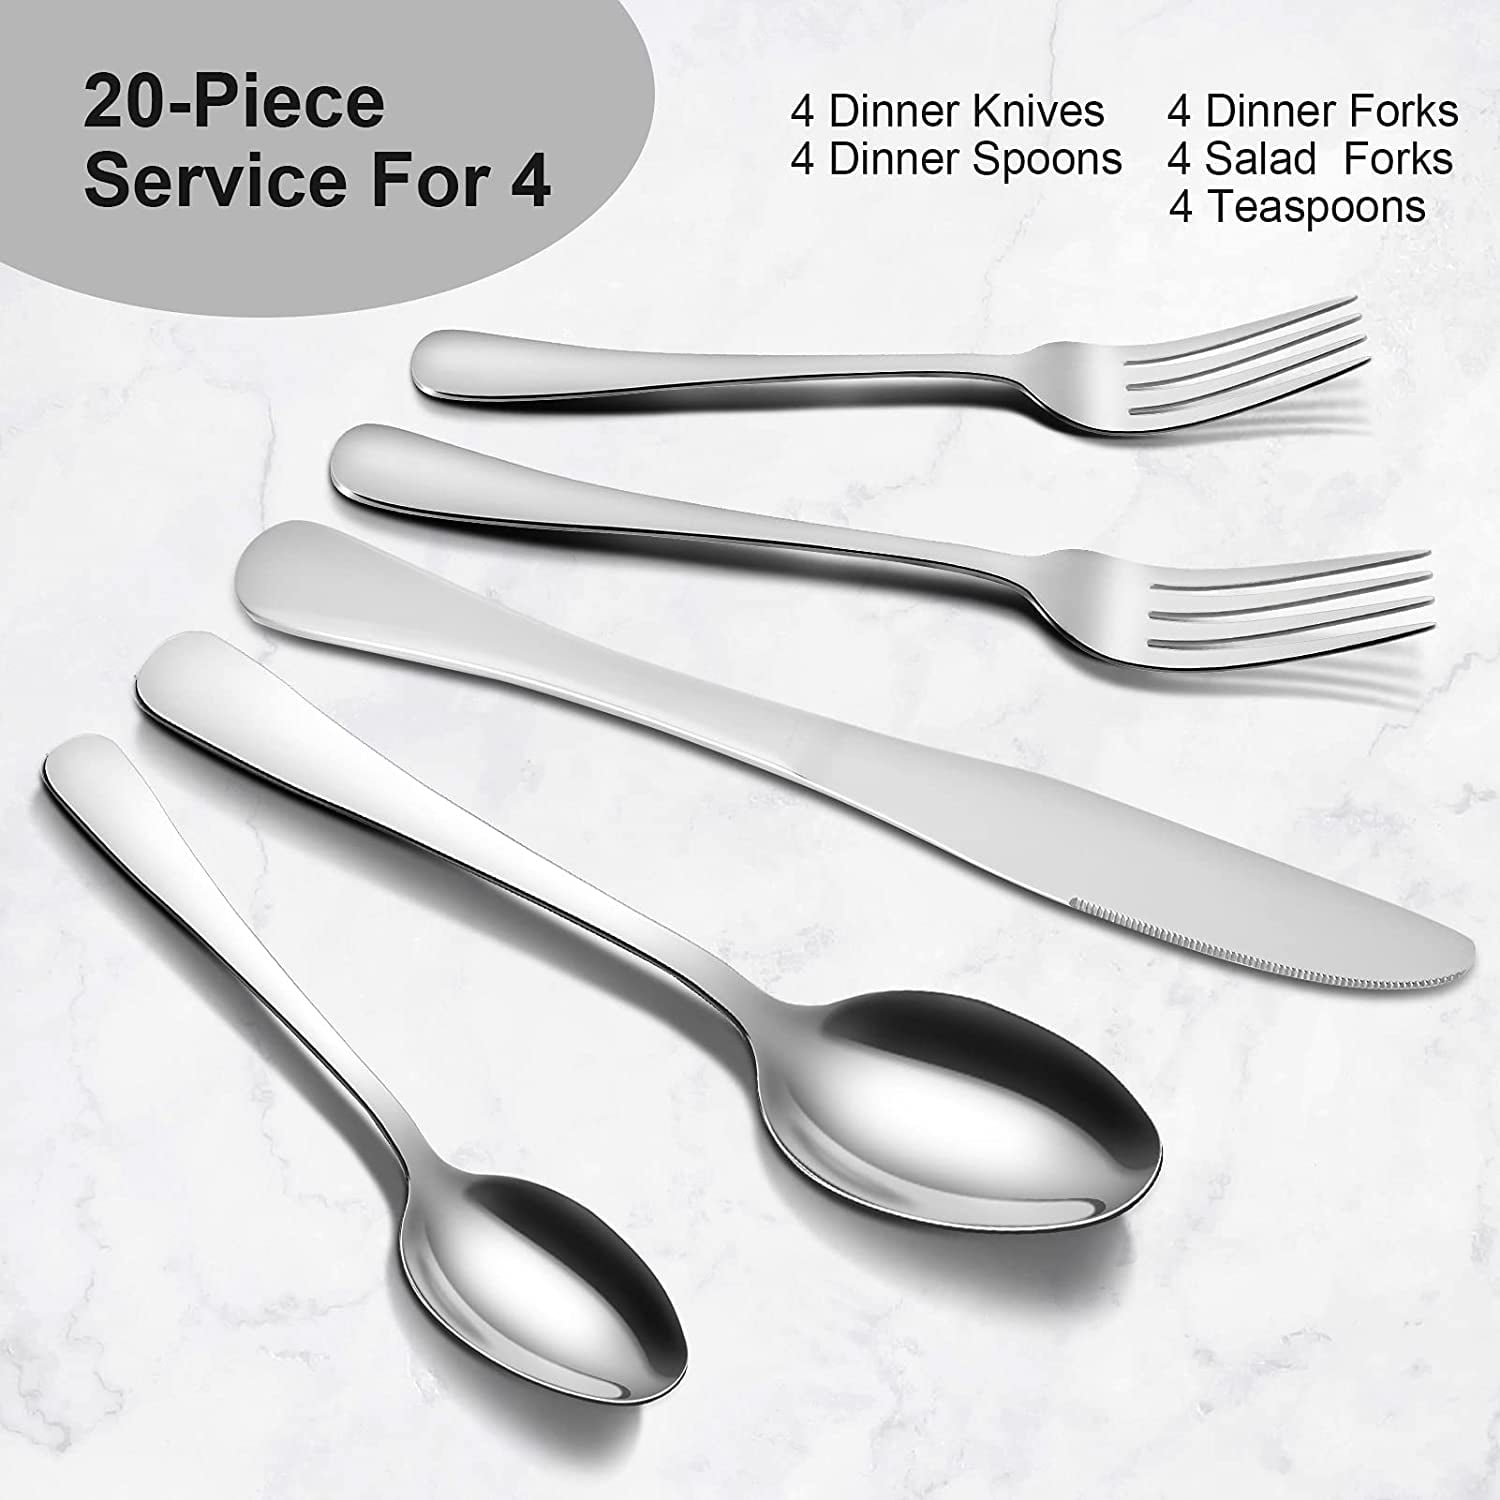 Silverware Set for 4-20 Piece Cutlery Set Stainless Steel Flatware Silverwear Set Brushed Stainless Steel Flatware Set Spoons and Forks Set Stainless Steel 18/10 Flatware Set 